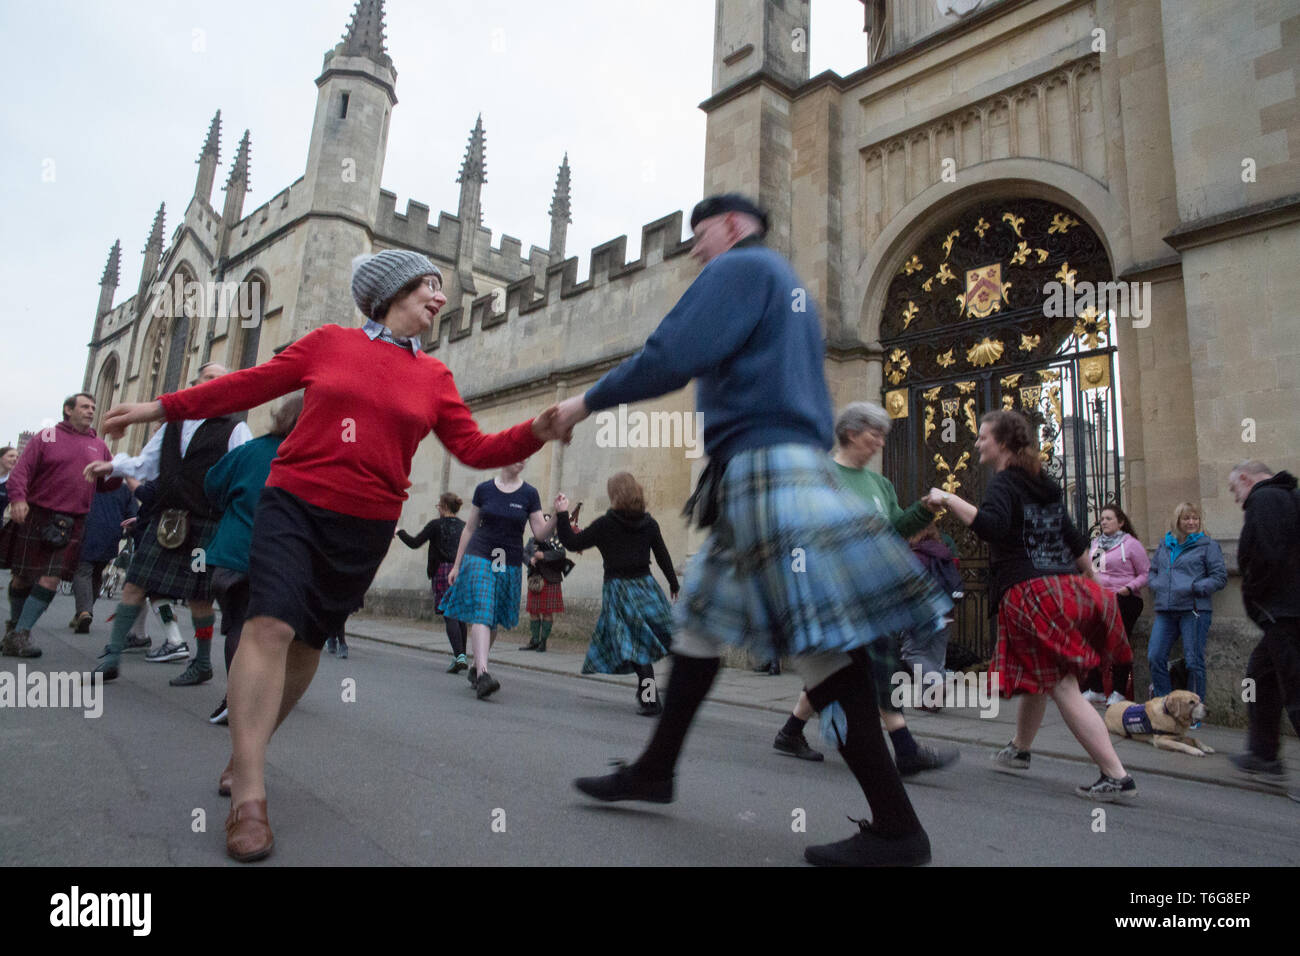 Oxford, UK. 1st May, 2019. Crowds of people gathered on Magdalene bridge to  hear a choir singing atop the Magdalene College Tower for a yearlong  tradition during Mayday celebration. Dancing in the